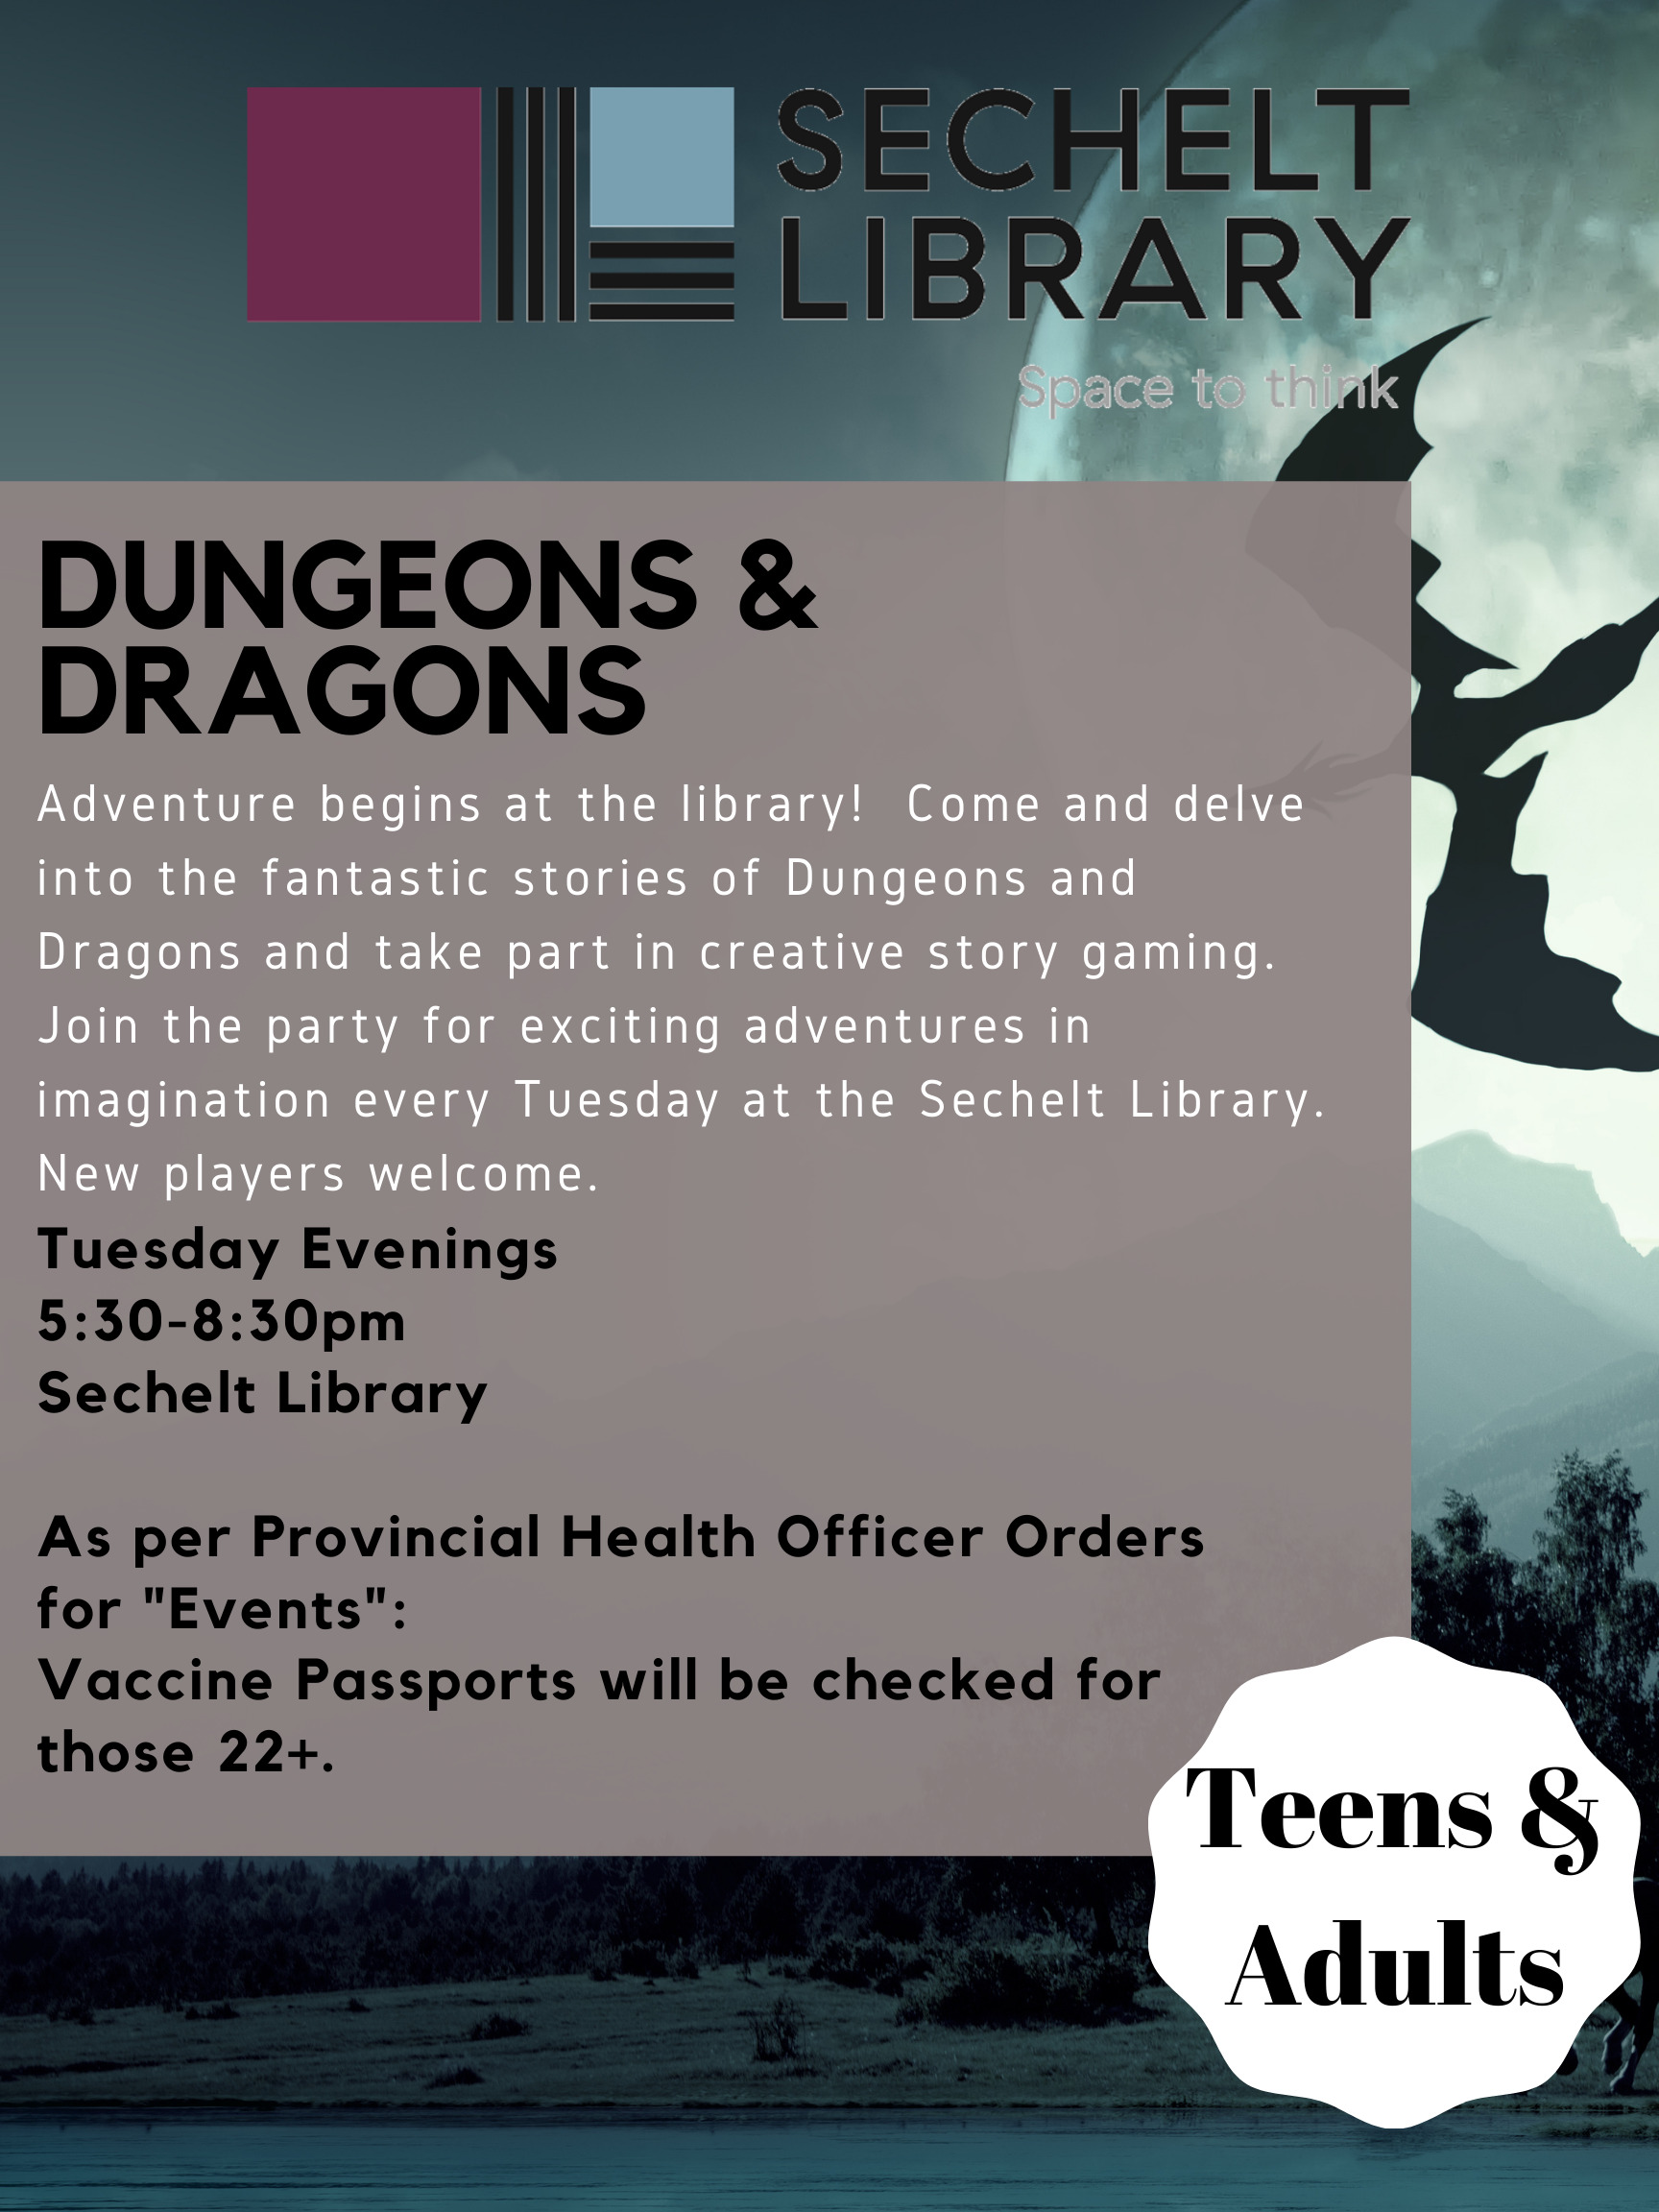 opens Dungeons & Dragons poster - Tuesday evenings, 5:30-8:30 in the library